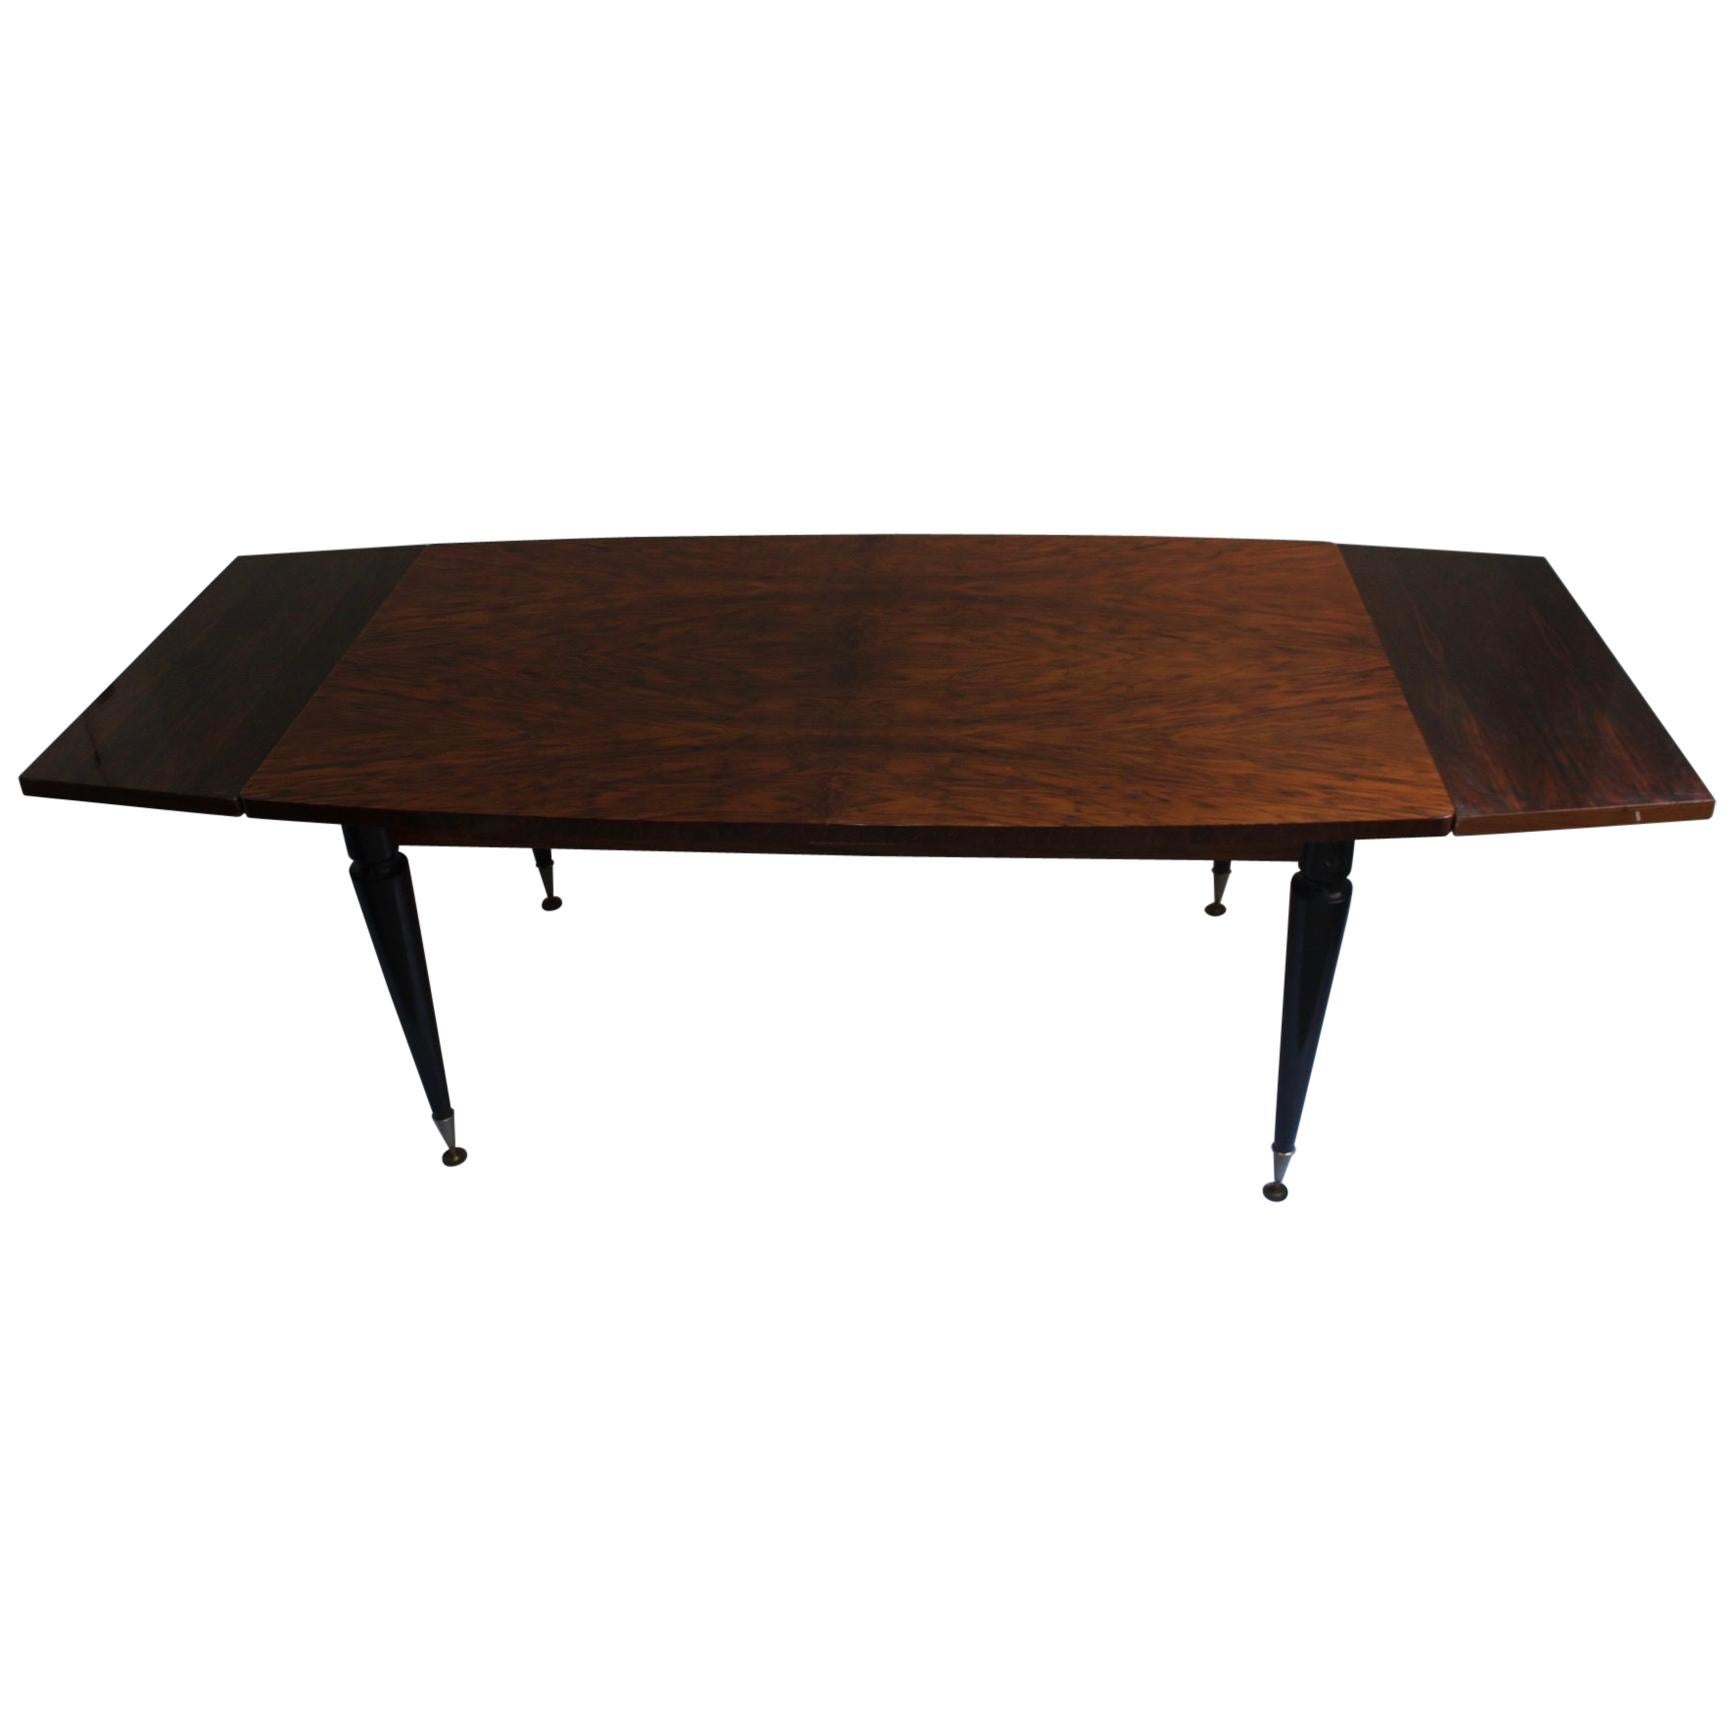 French Art Deco High Quality American Walnut Burl Extensible Dining Table, 1940s For Sale